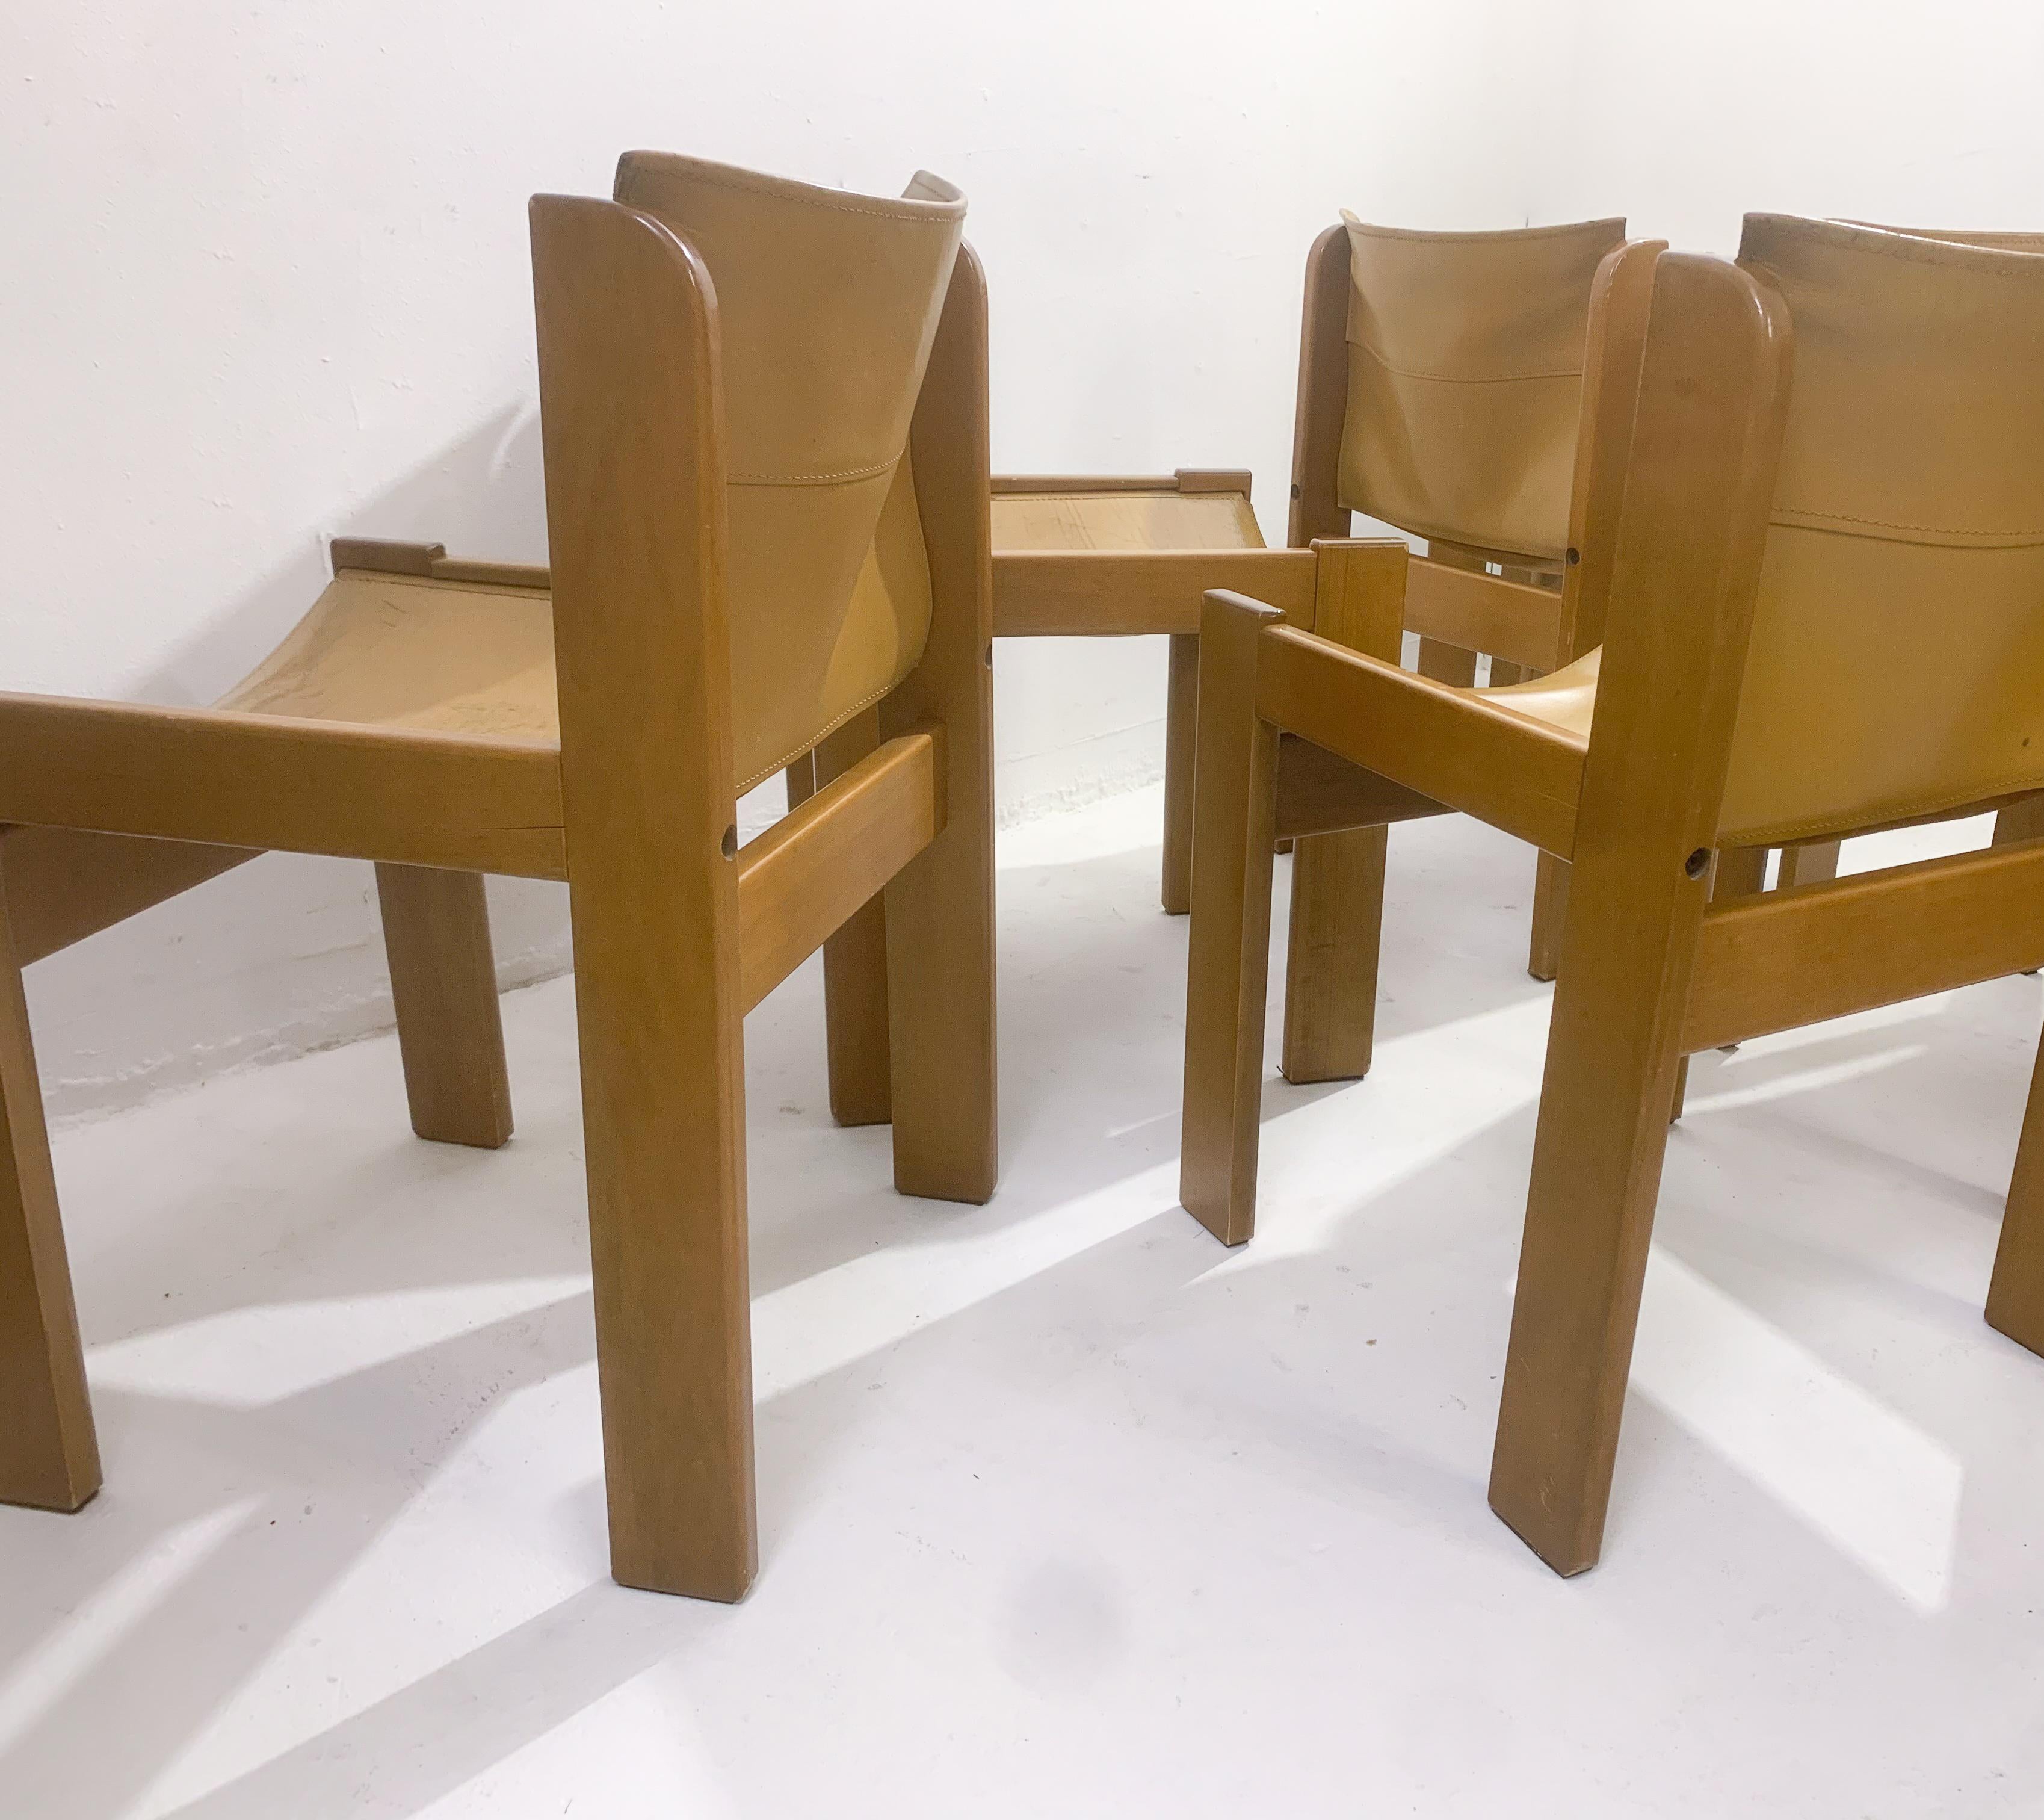 Late 20th Century Mid-Century Modern Set of 6 Chairs, Ibisco, Leather and Wood, Italy, 1970s